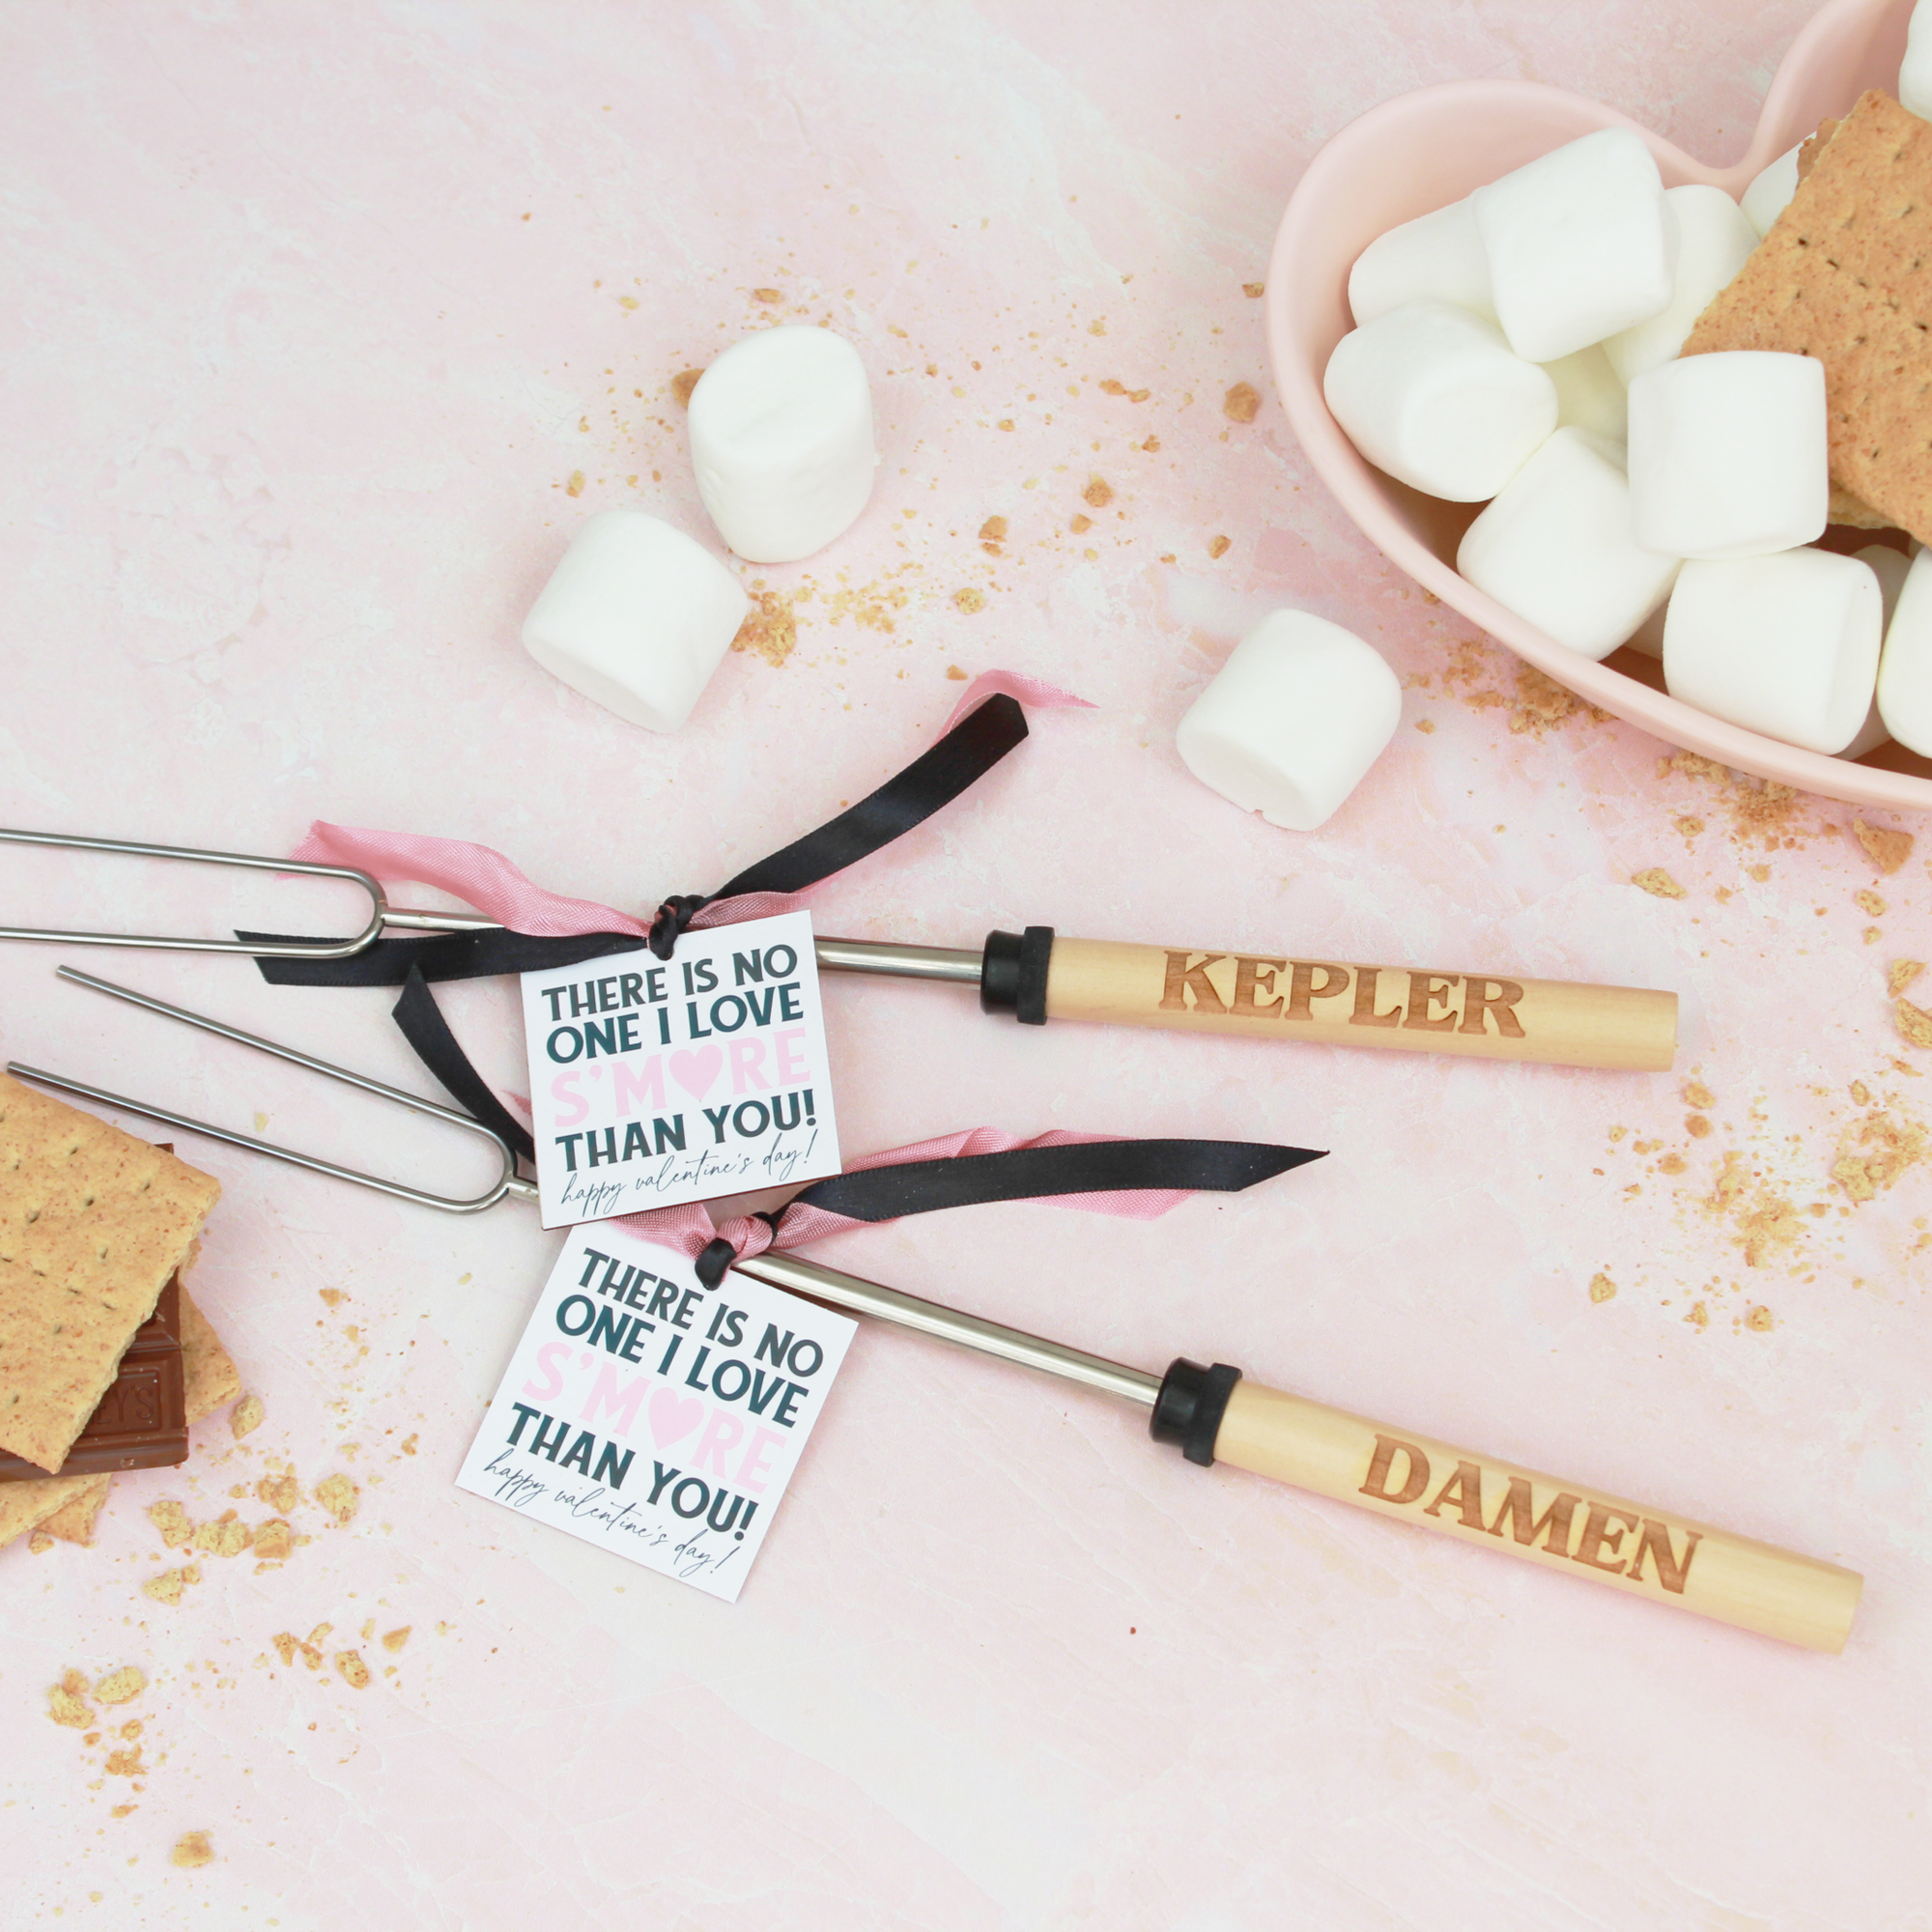 Personalized S'mores Sticks